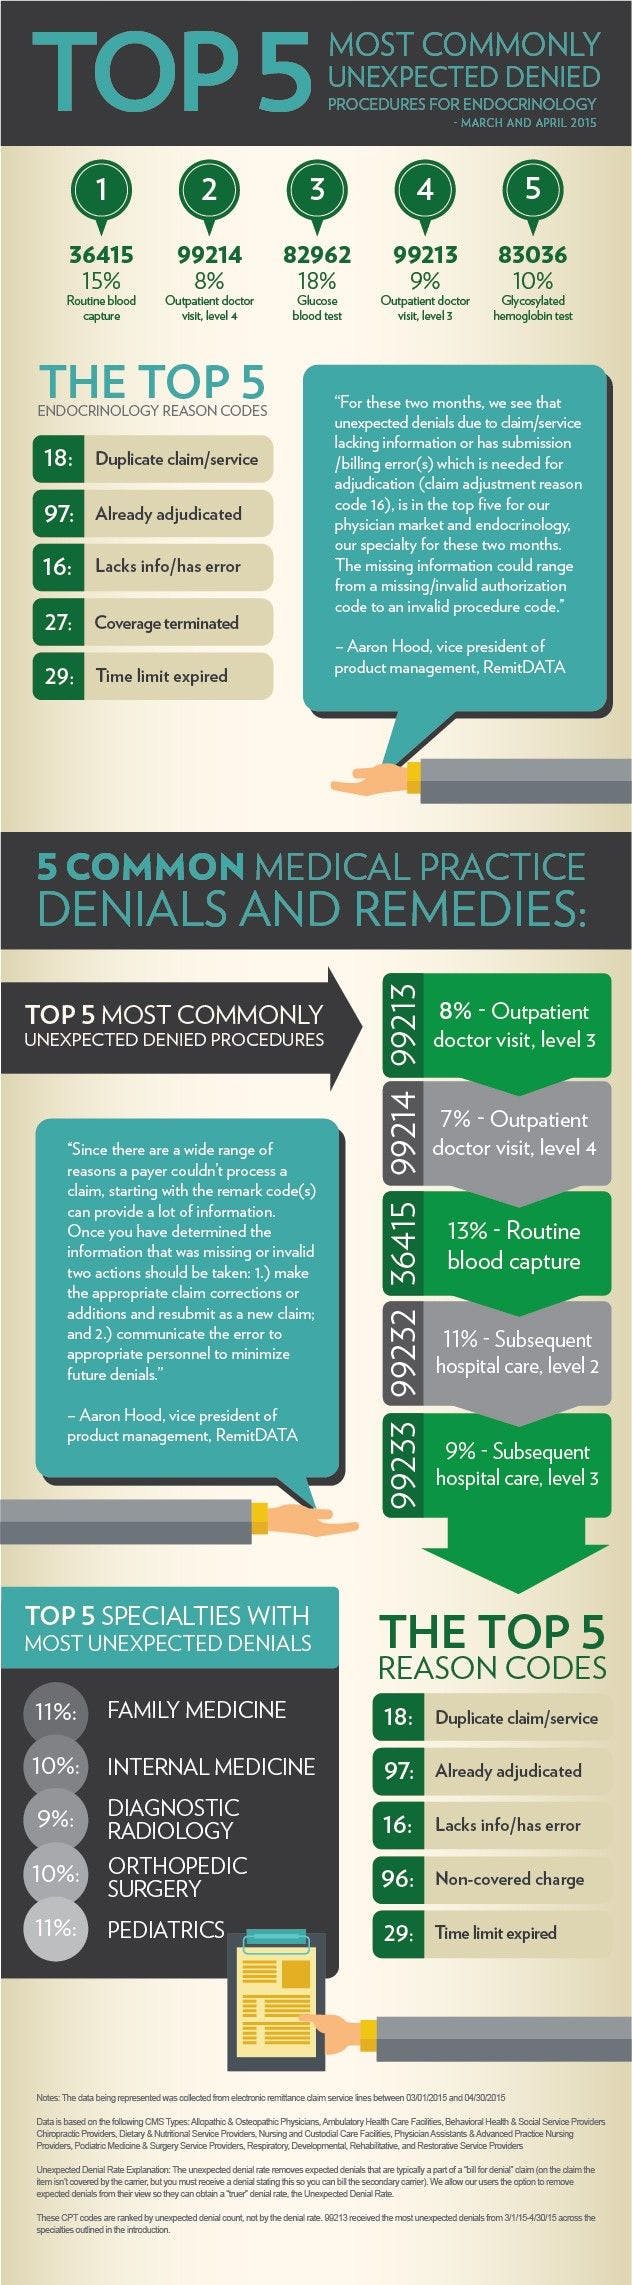 Medical Claim Denials and Remedies: Trends for Spring 2015